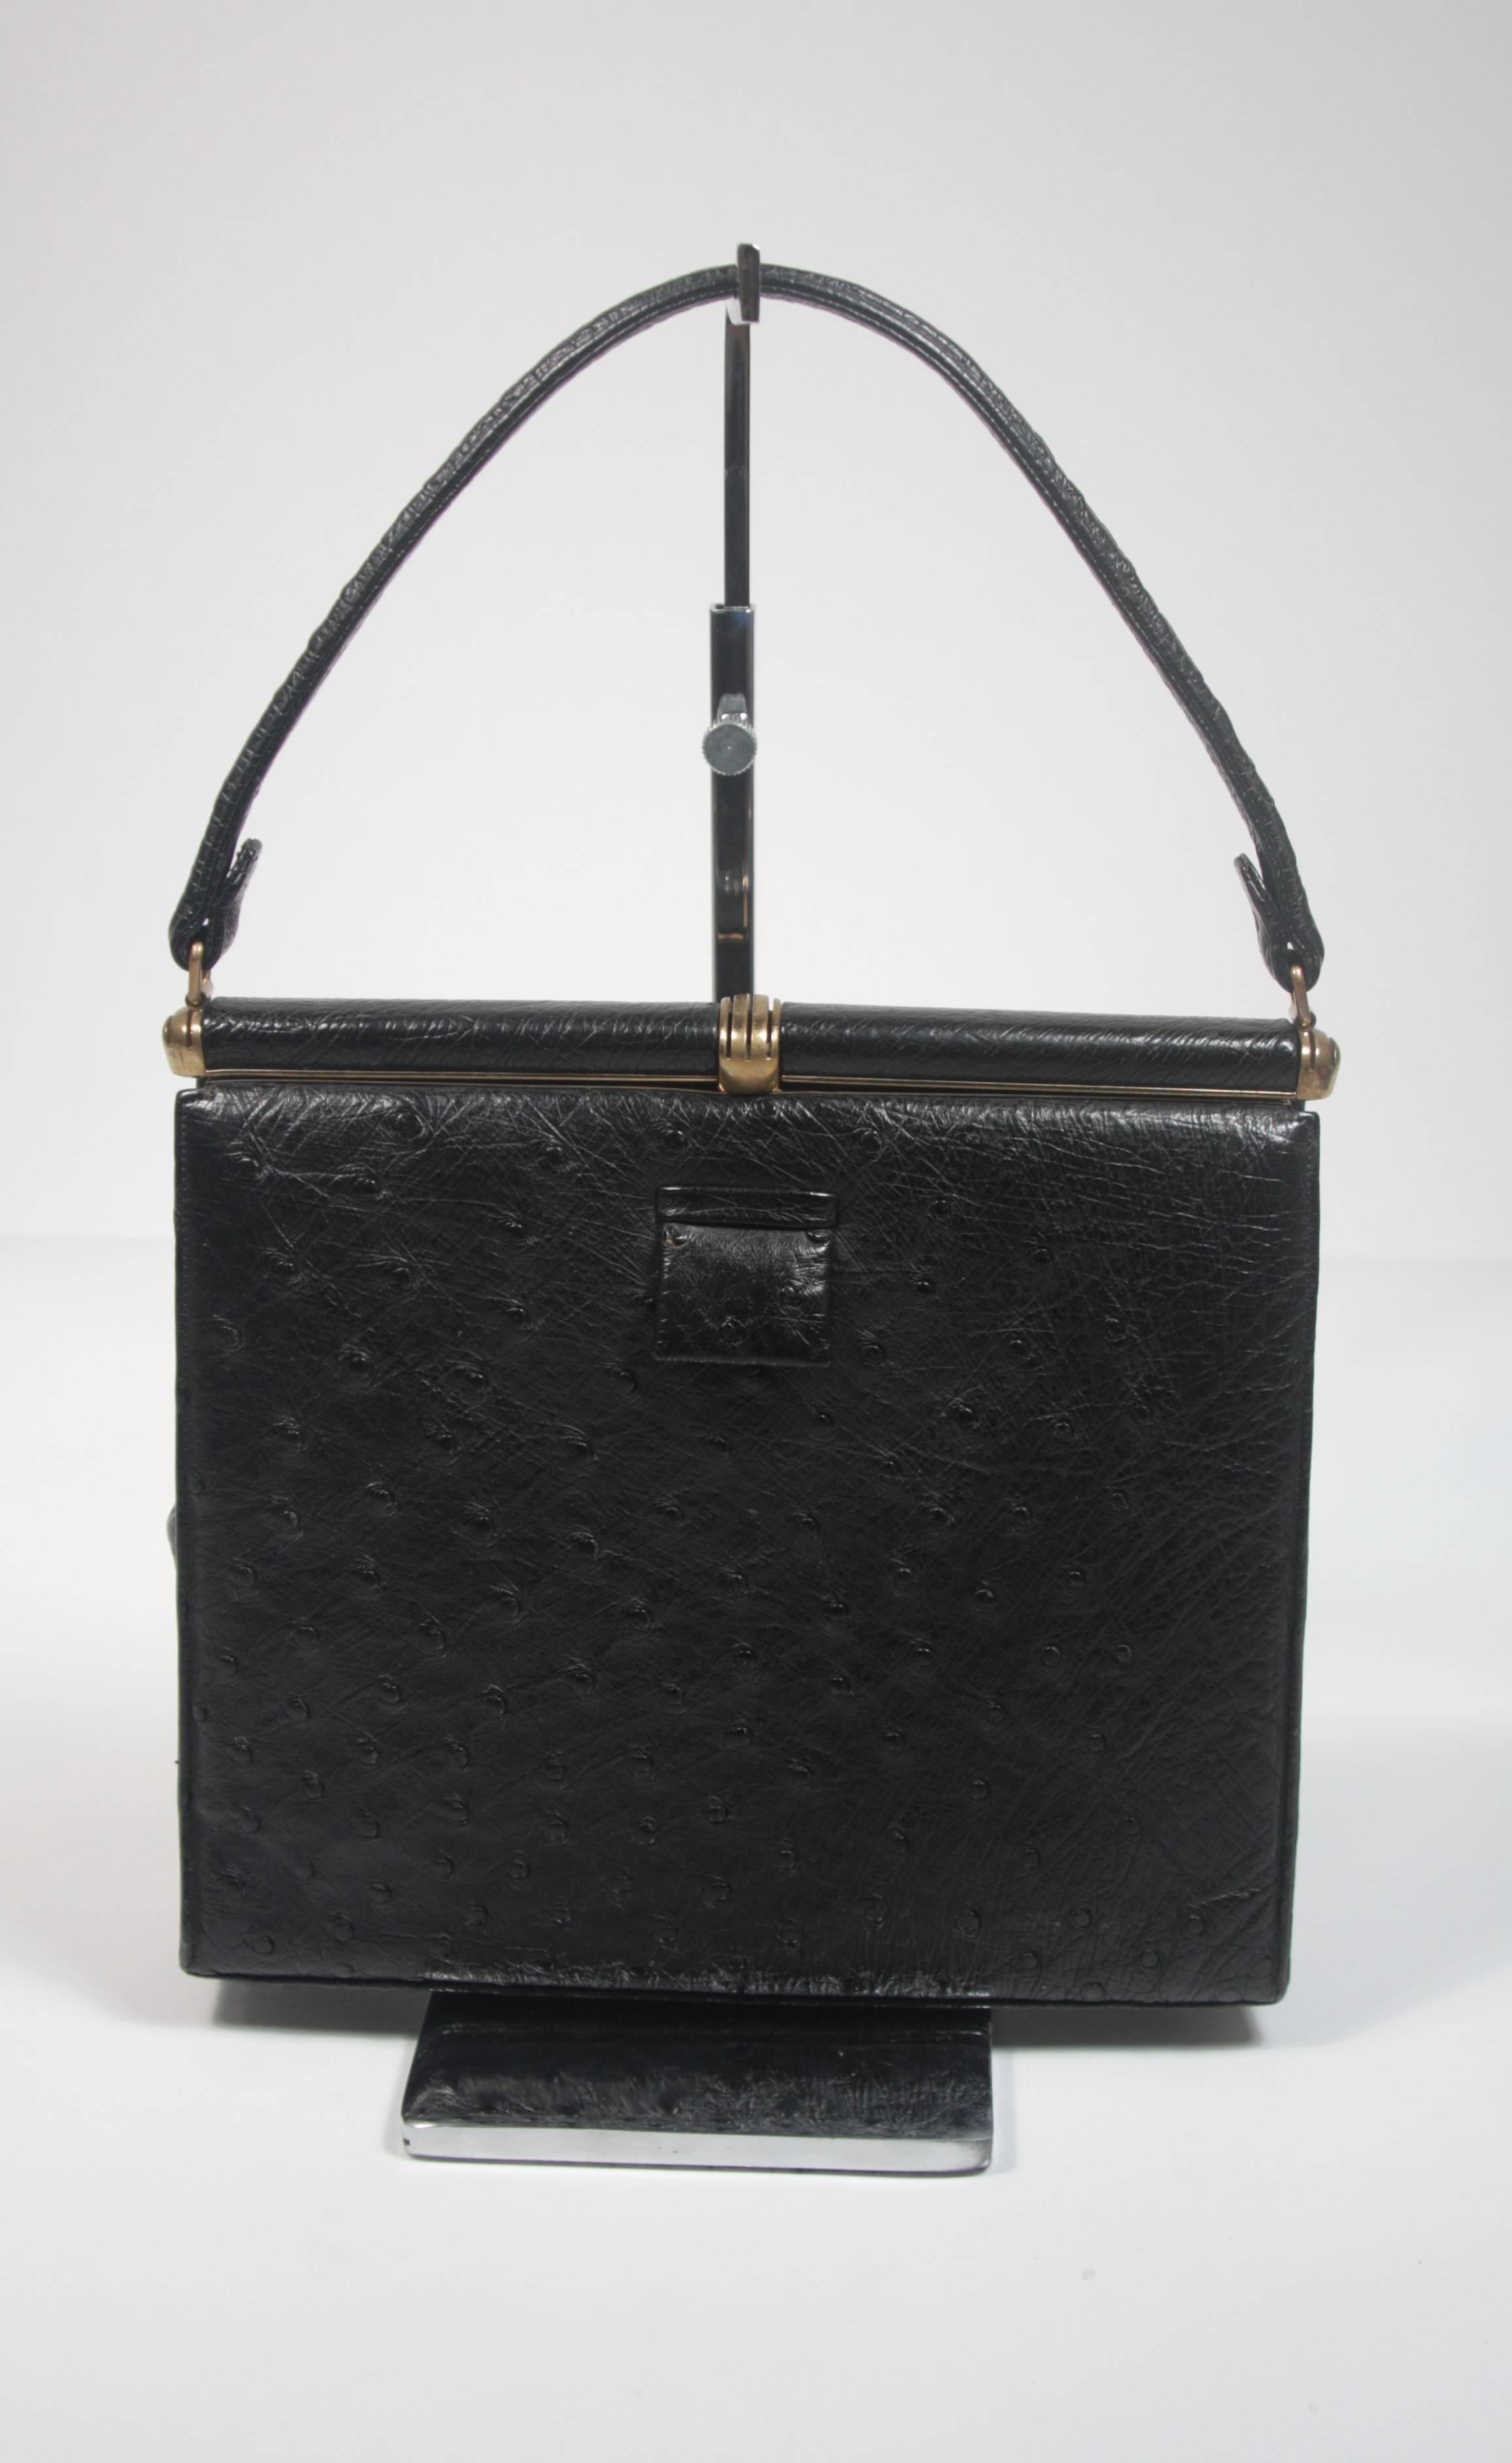 This Lucille De Paris handbag is composed of black ostrich with gold tone hardware. It features multiple interior compartments and comes with the original mirror. In excellent vintage condition. Made in France. 

**Please cross-reference